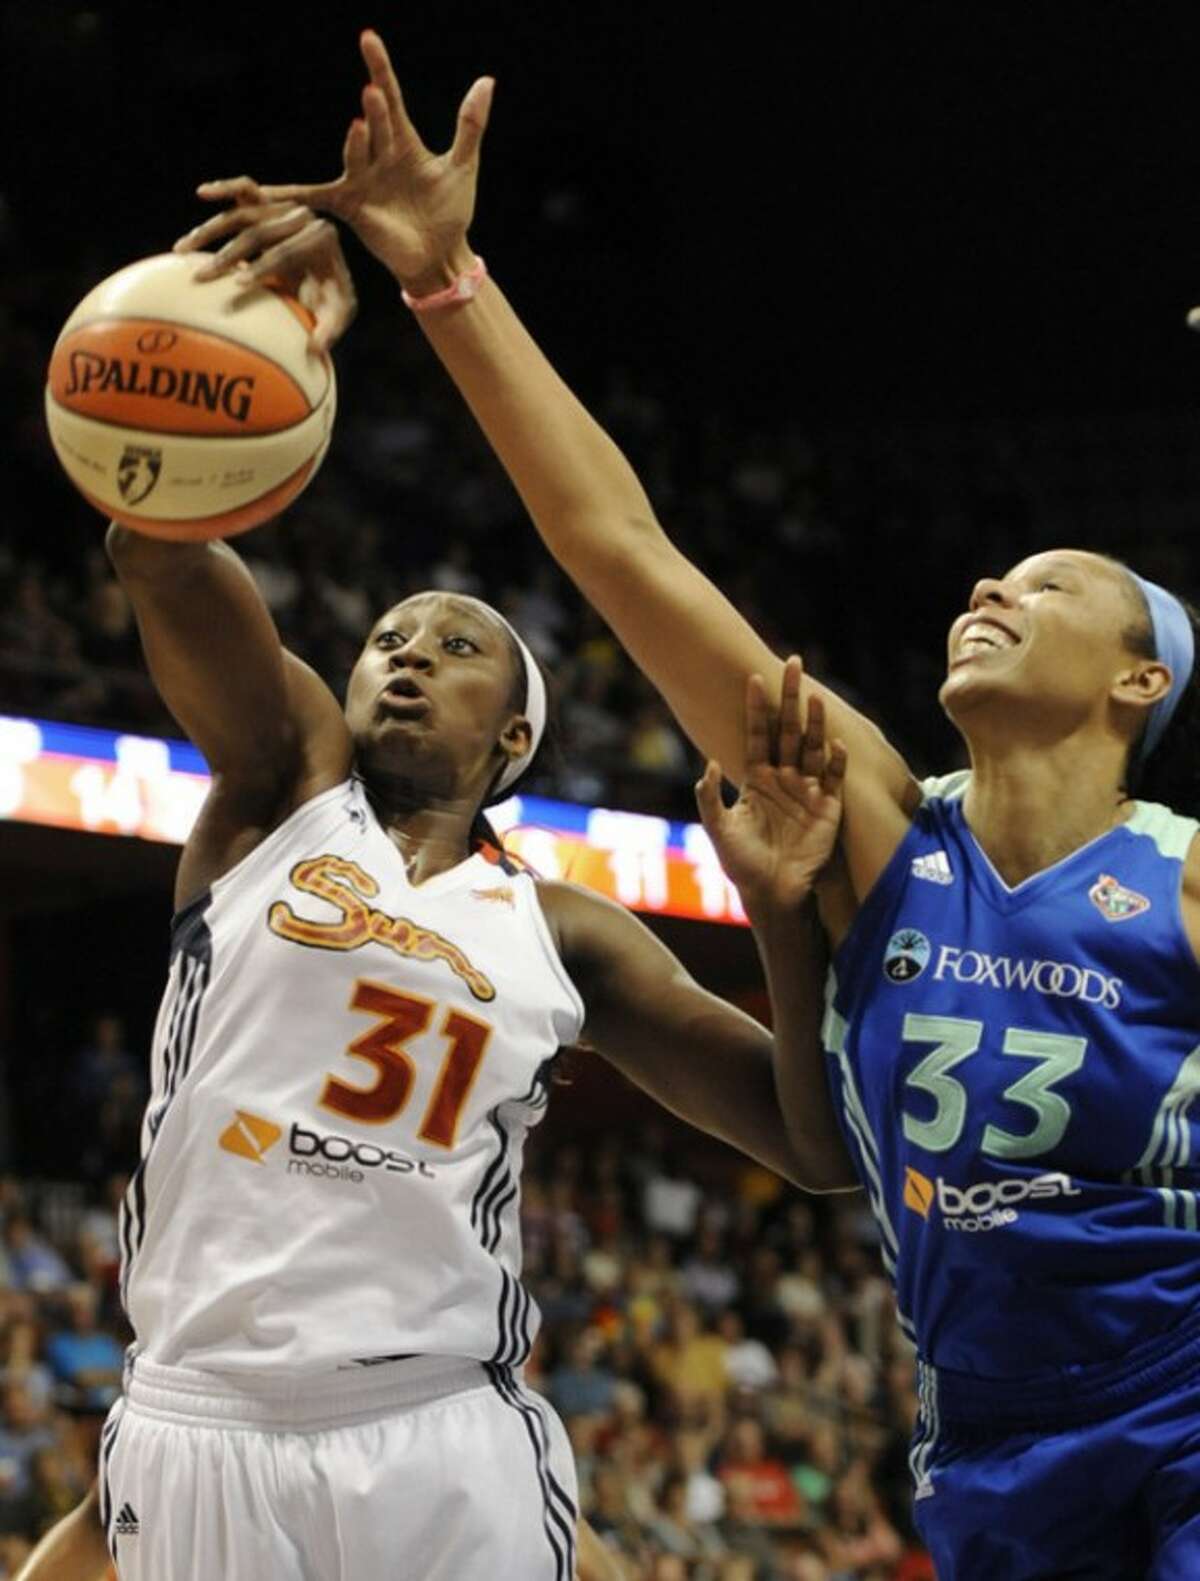 Connecticut Sun's Tina Charles (31) grabs a defensive rebound against New York Liberty's Plenette Pierson (33) during the first half of a WNBA basketball game in Uncasville, Conn., Saturday, Aug. 18, 2012. (AP Photo/Jessica Hill)